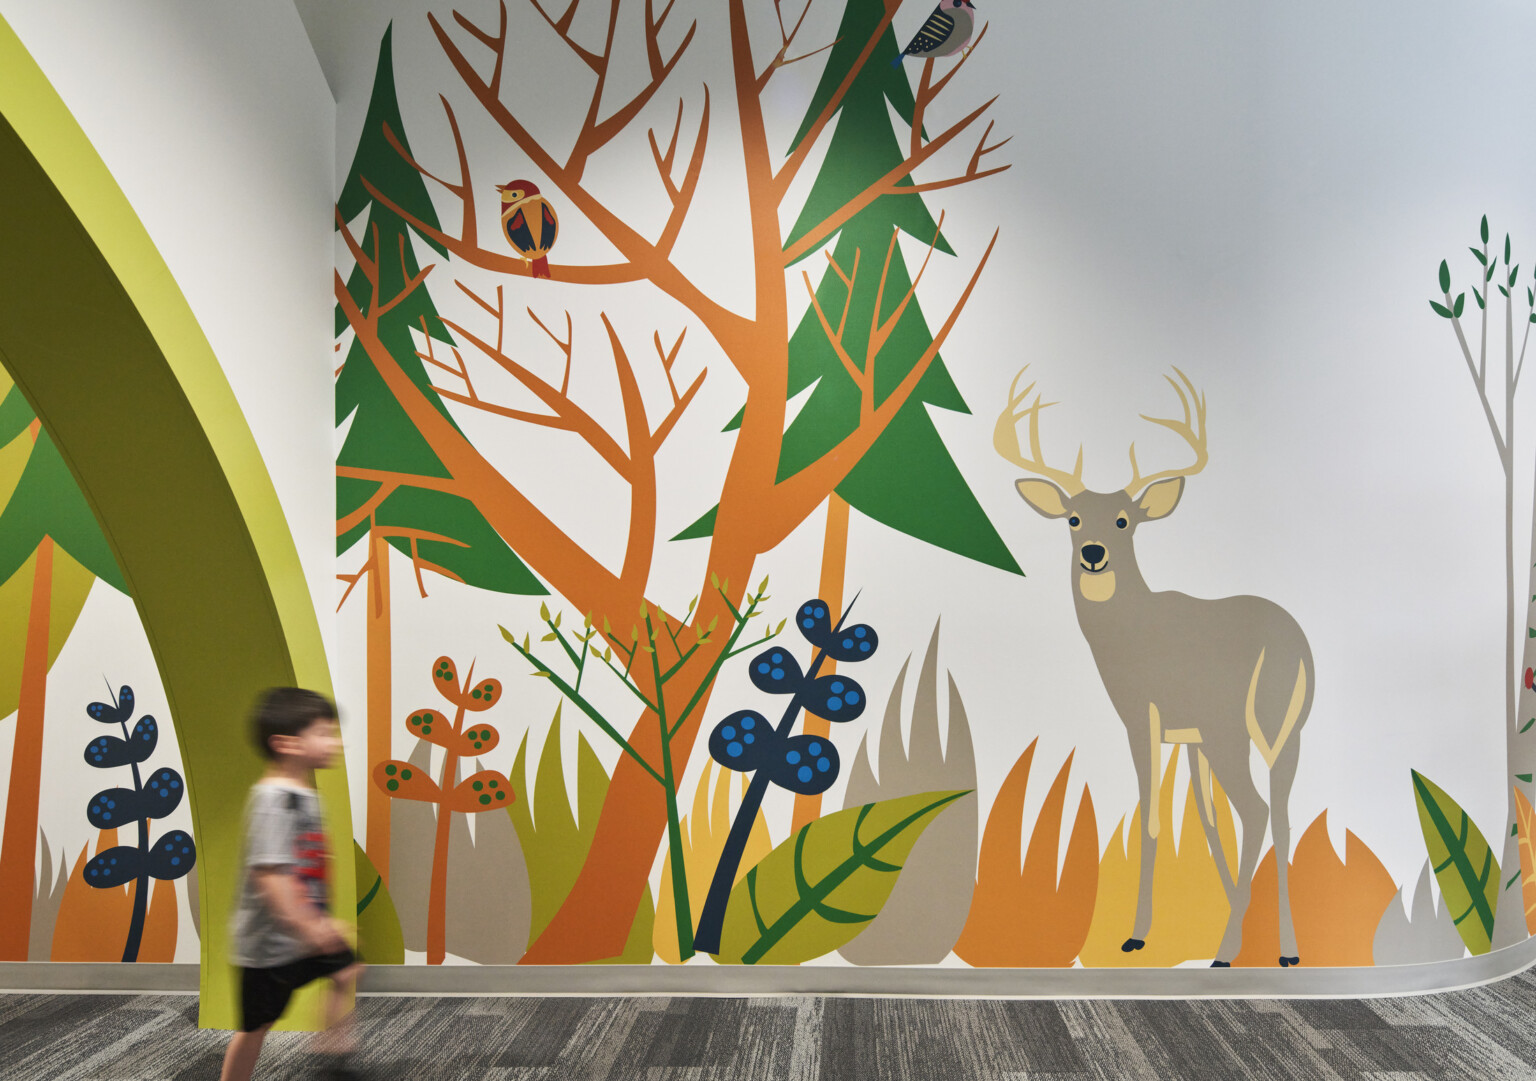 Child walks by colorful mural of cartoon forest and animals in carpeted school hallway, mixed trees, deer, owl, racoon